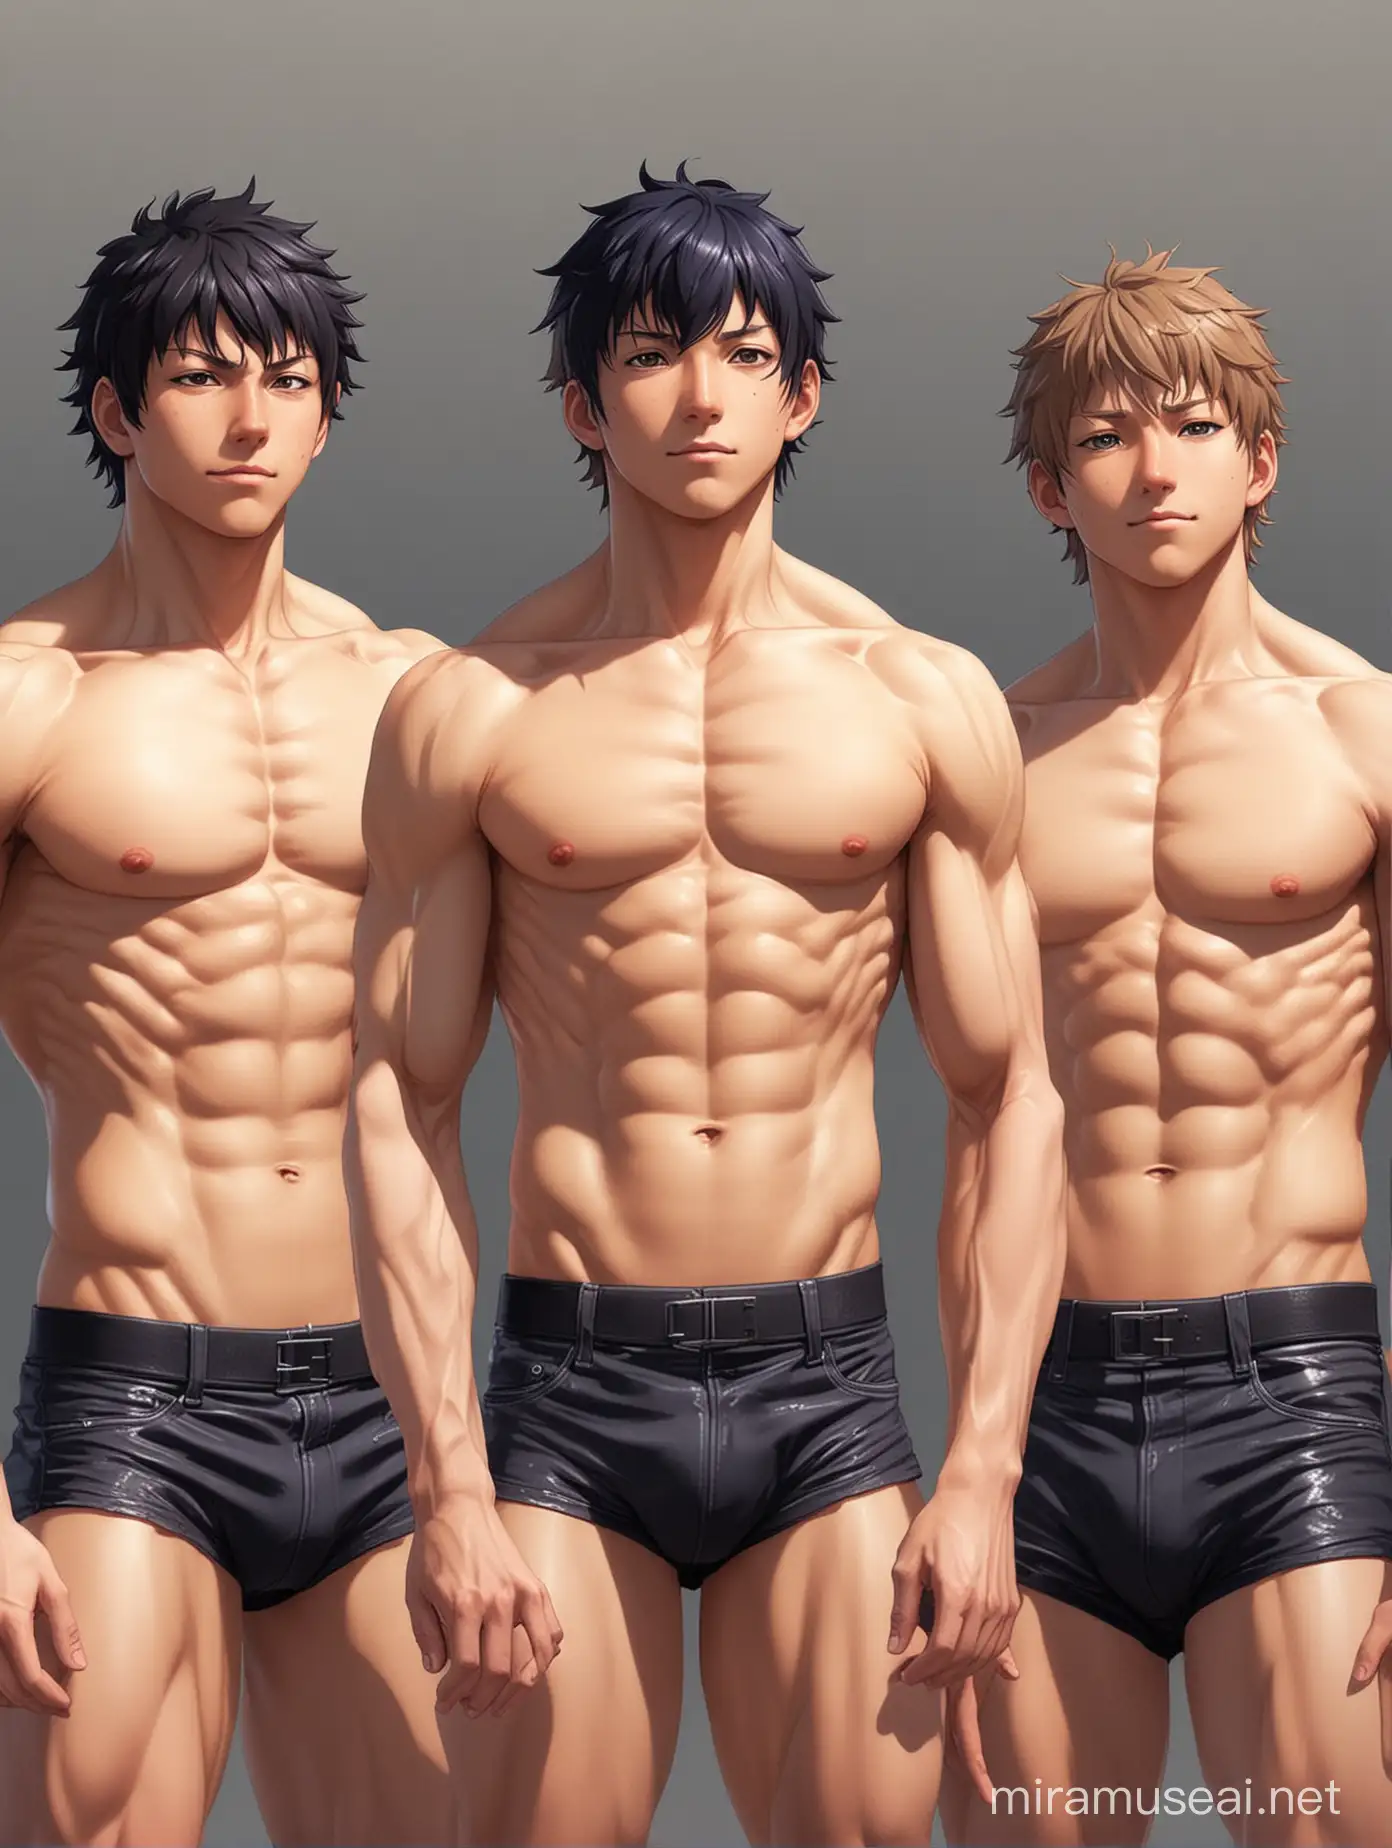 Anime style. Hinata Shouyou, very muscular, shirtless, eight pack abs, very tall. Standing beside shirtless Kageyama Tobio, thinner and shorter.